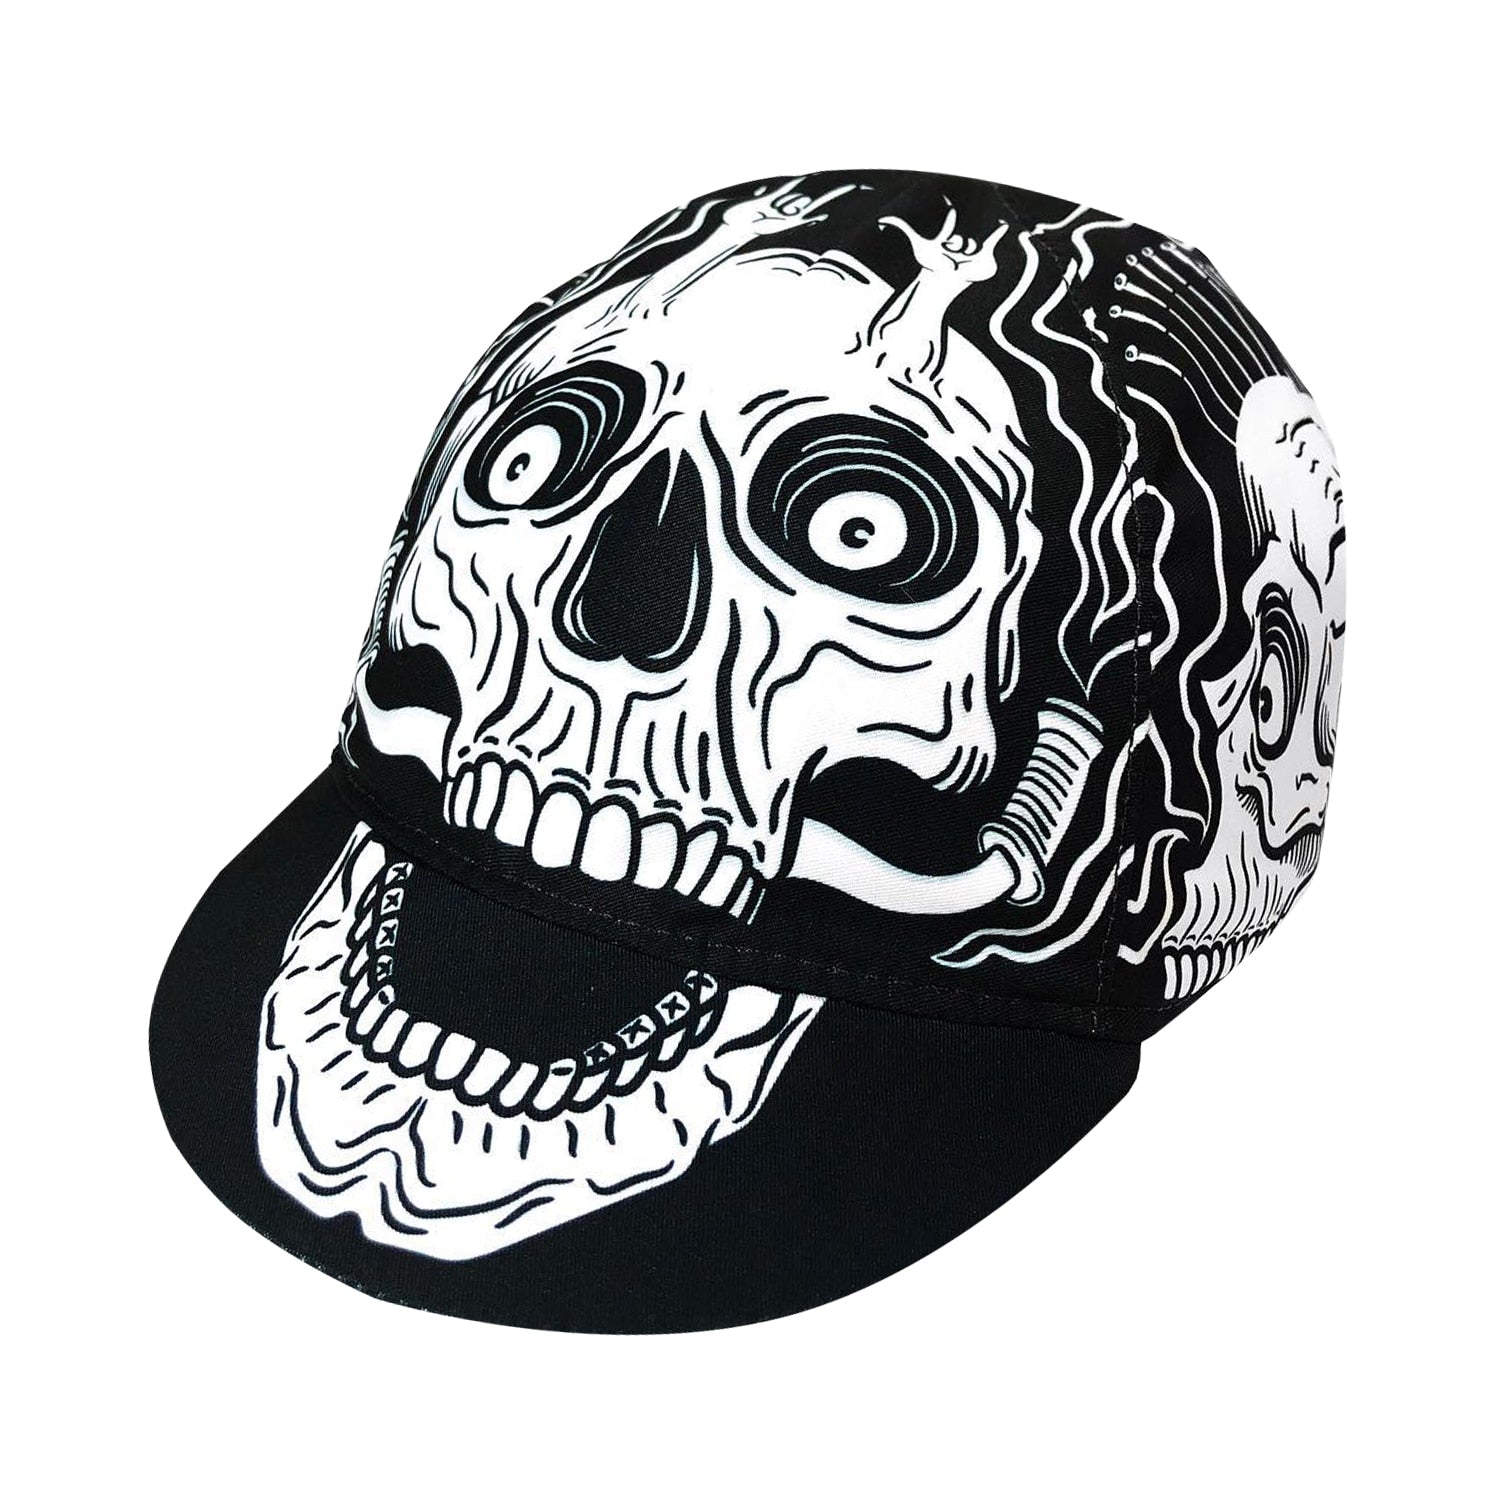 Brutal Skull With Knife Black Series Polyester Cycling Caps Outdoor Sports Bicycle Summer Hats Quick Dry Breathable Unisex